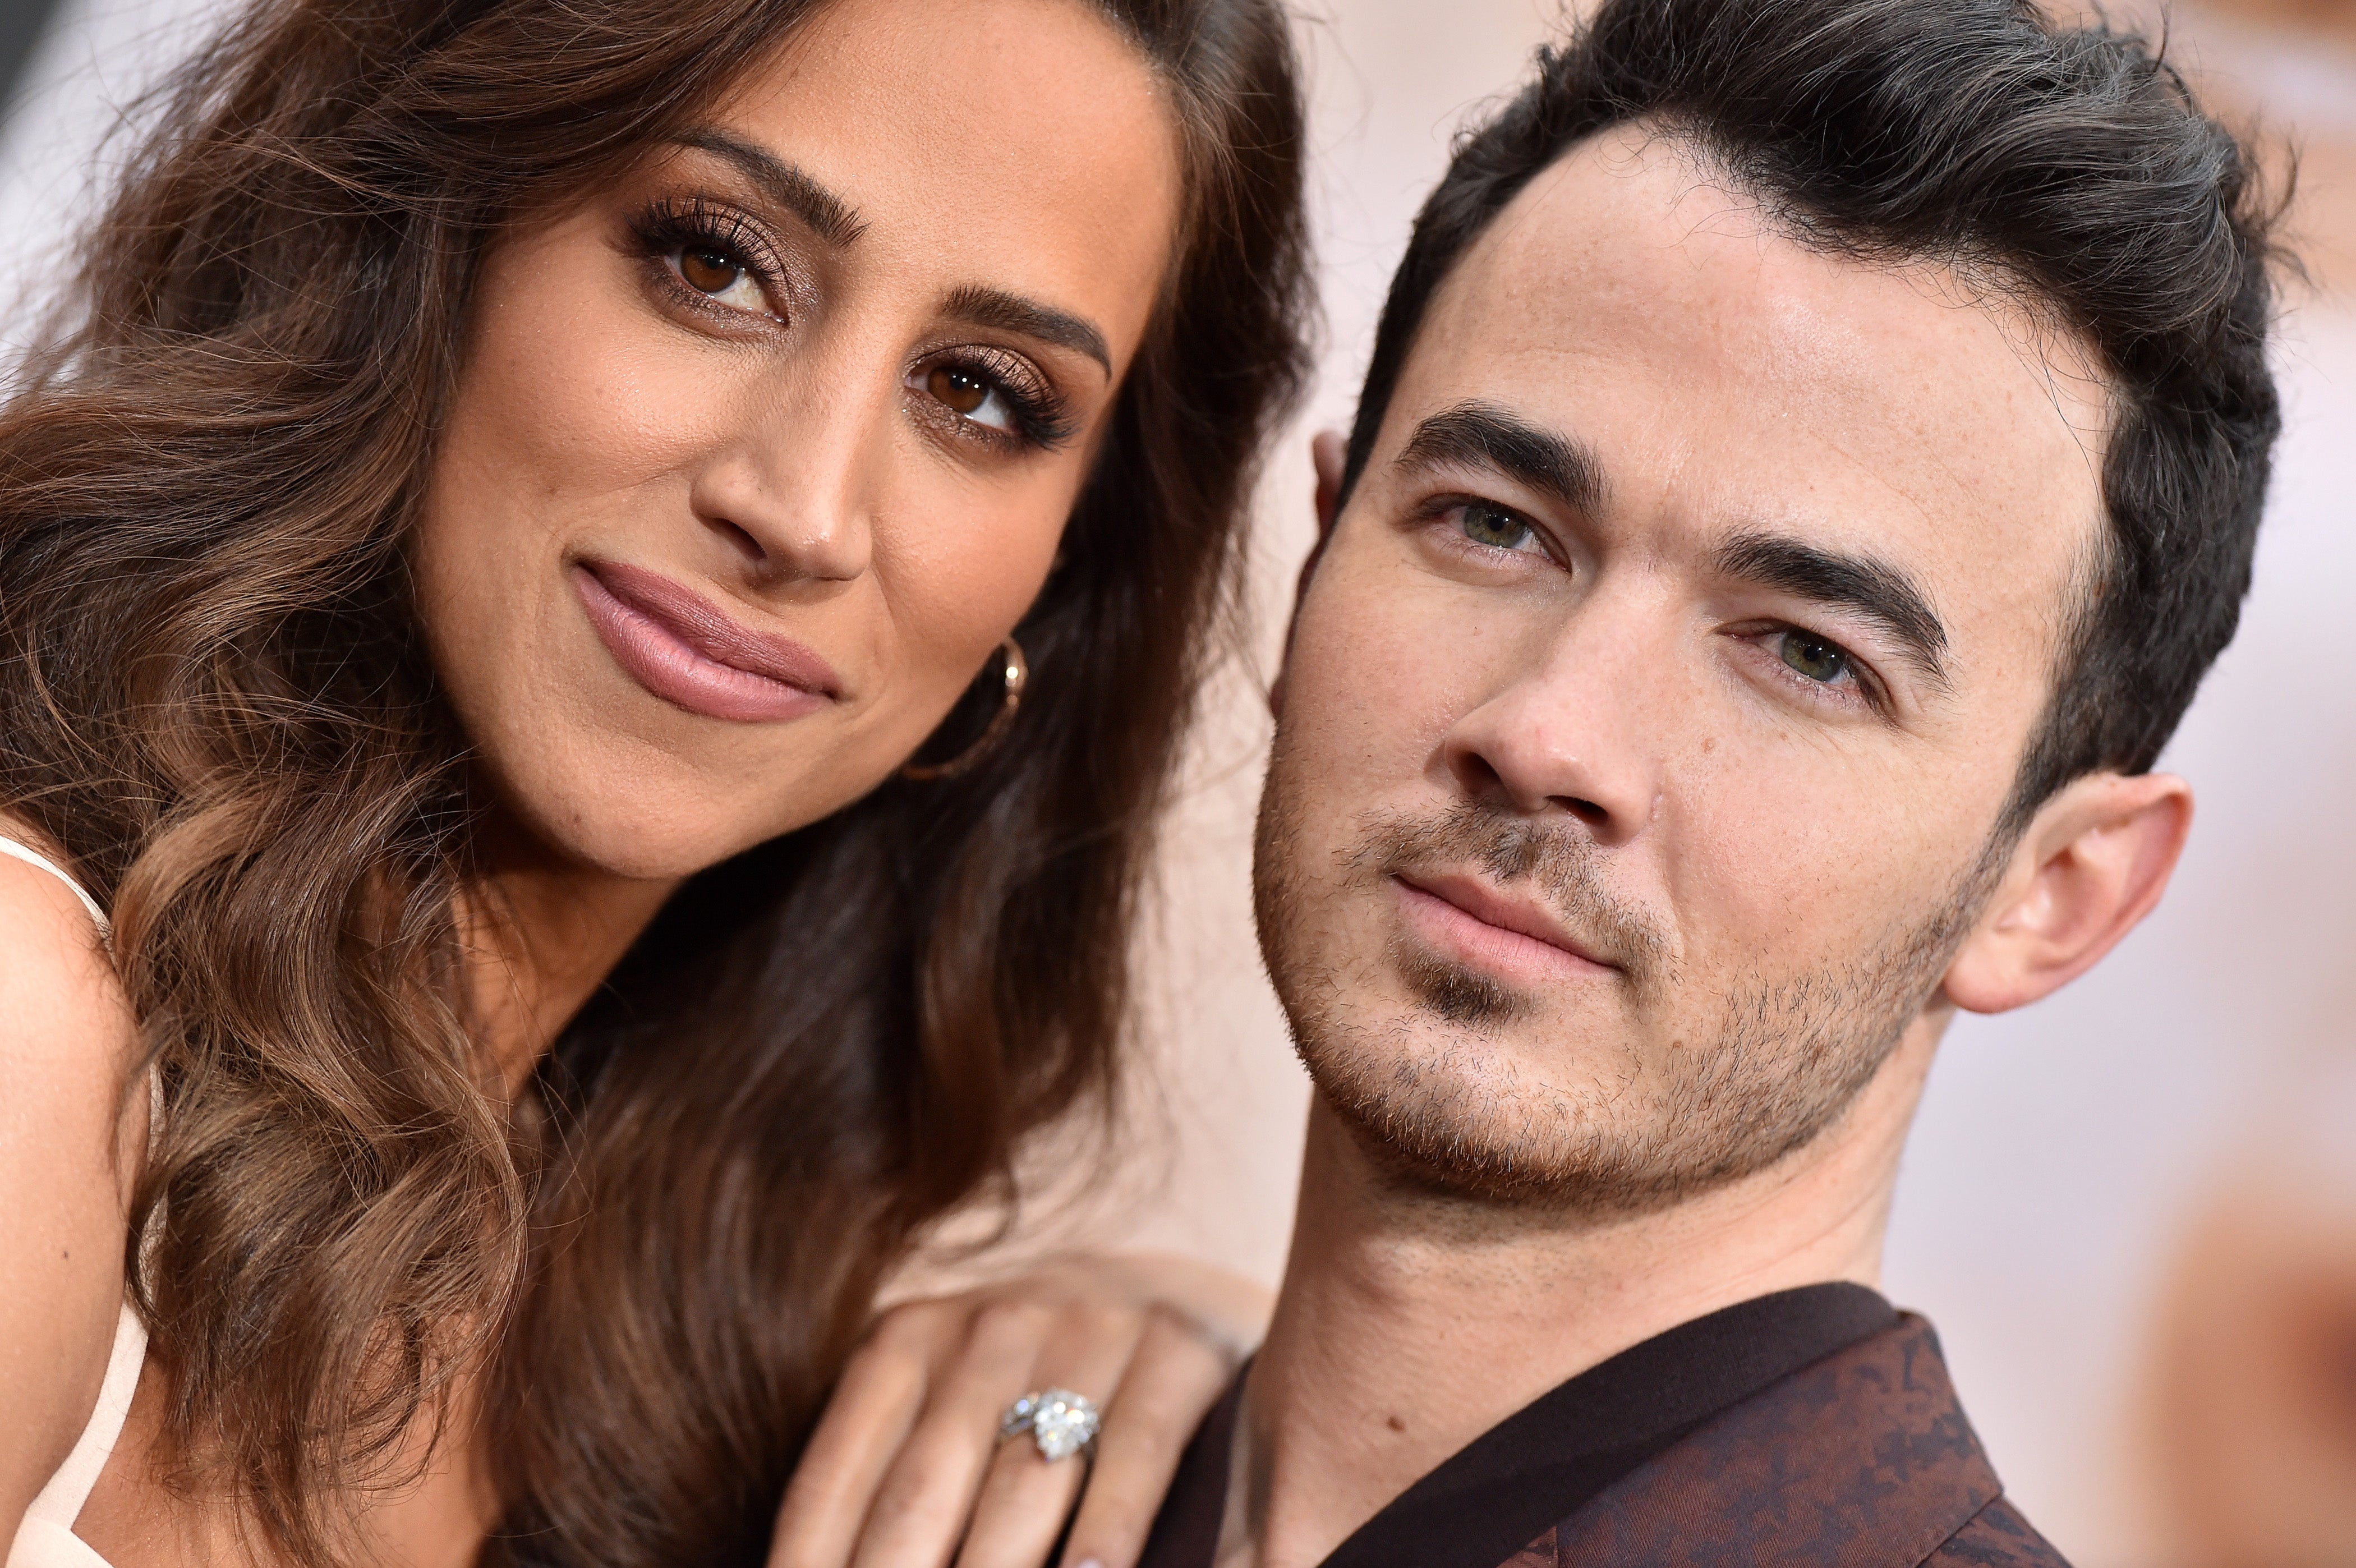 Kevin Jonas and wife Danielle can't keep their hands off each